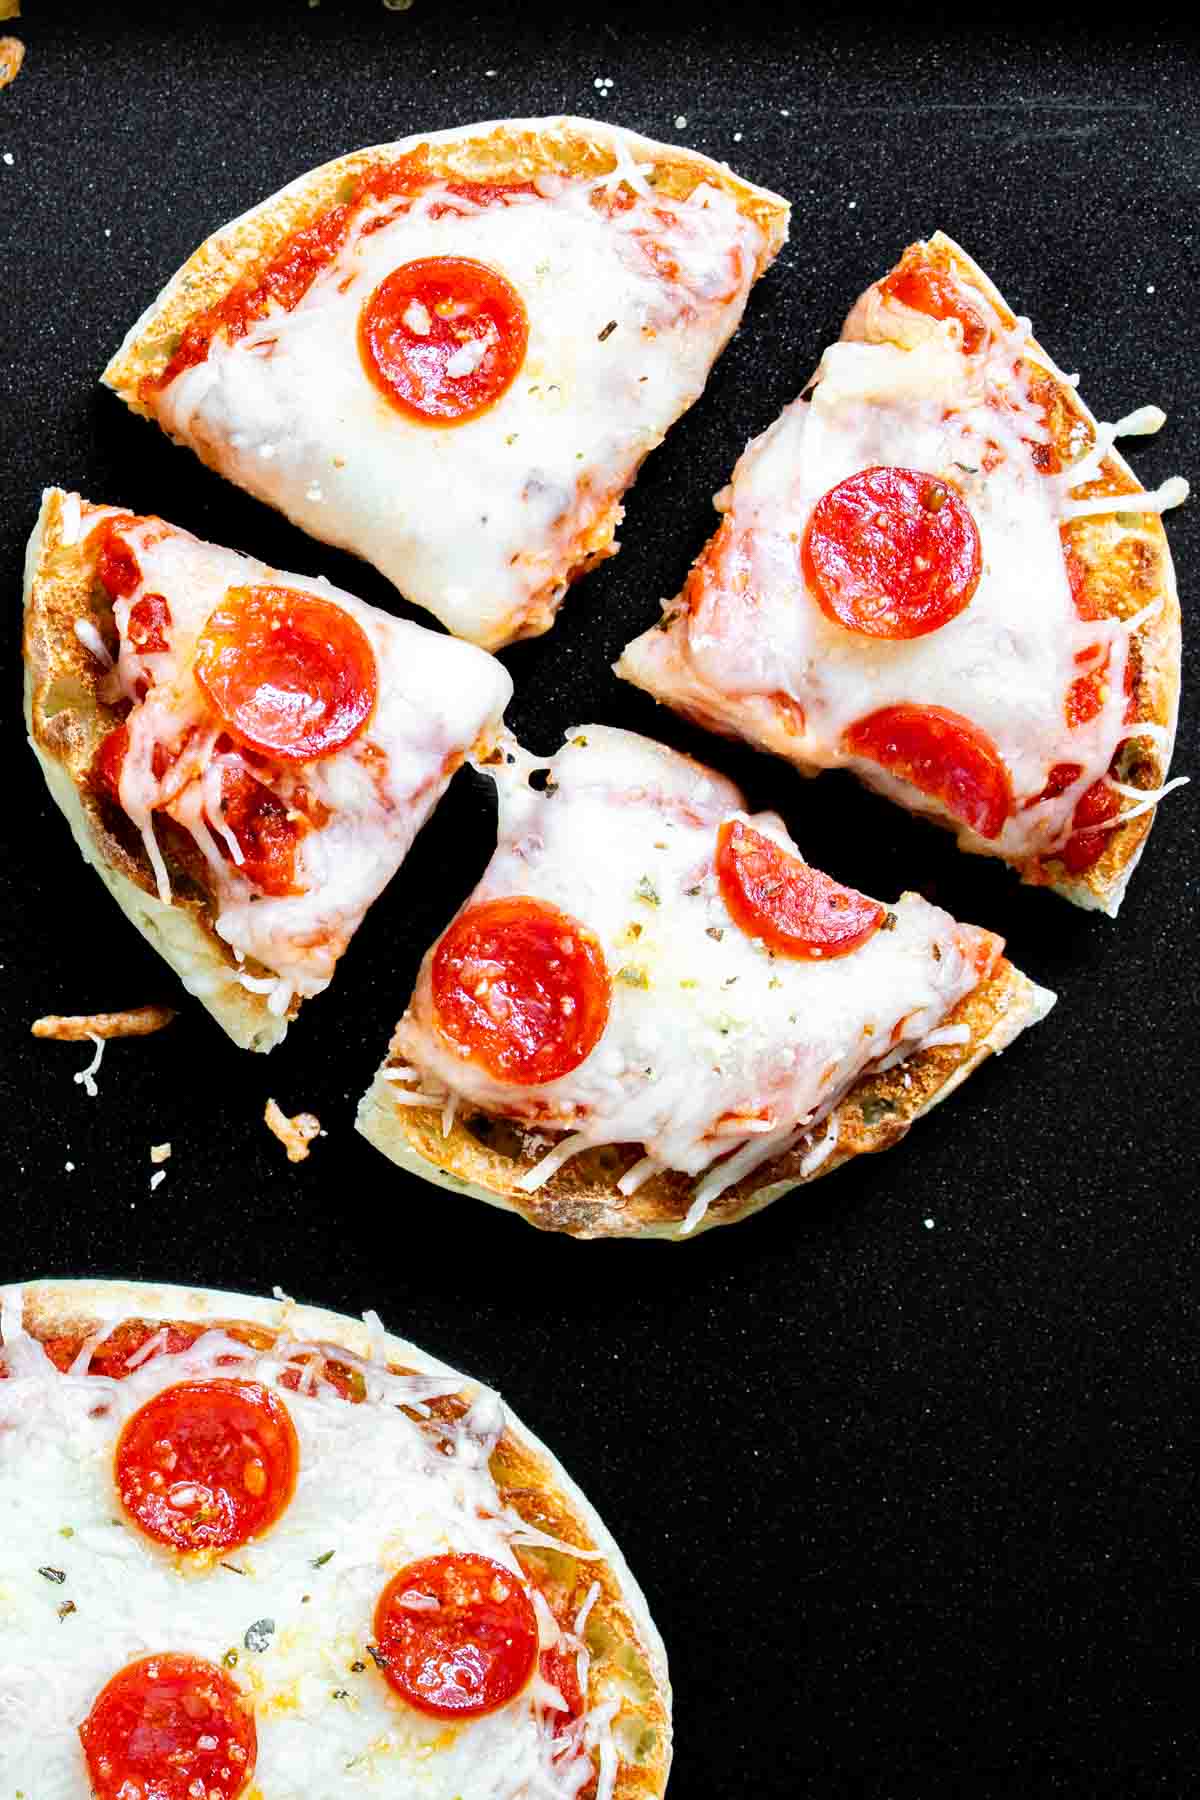 A english muffin pizzas with pepperoni on it.